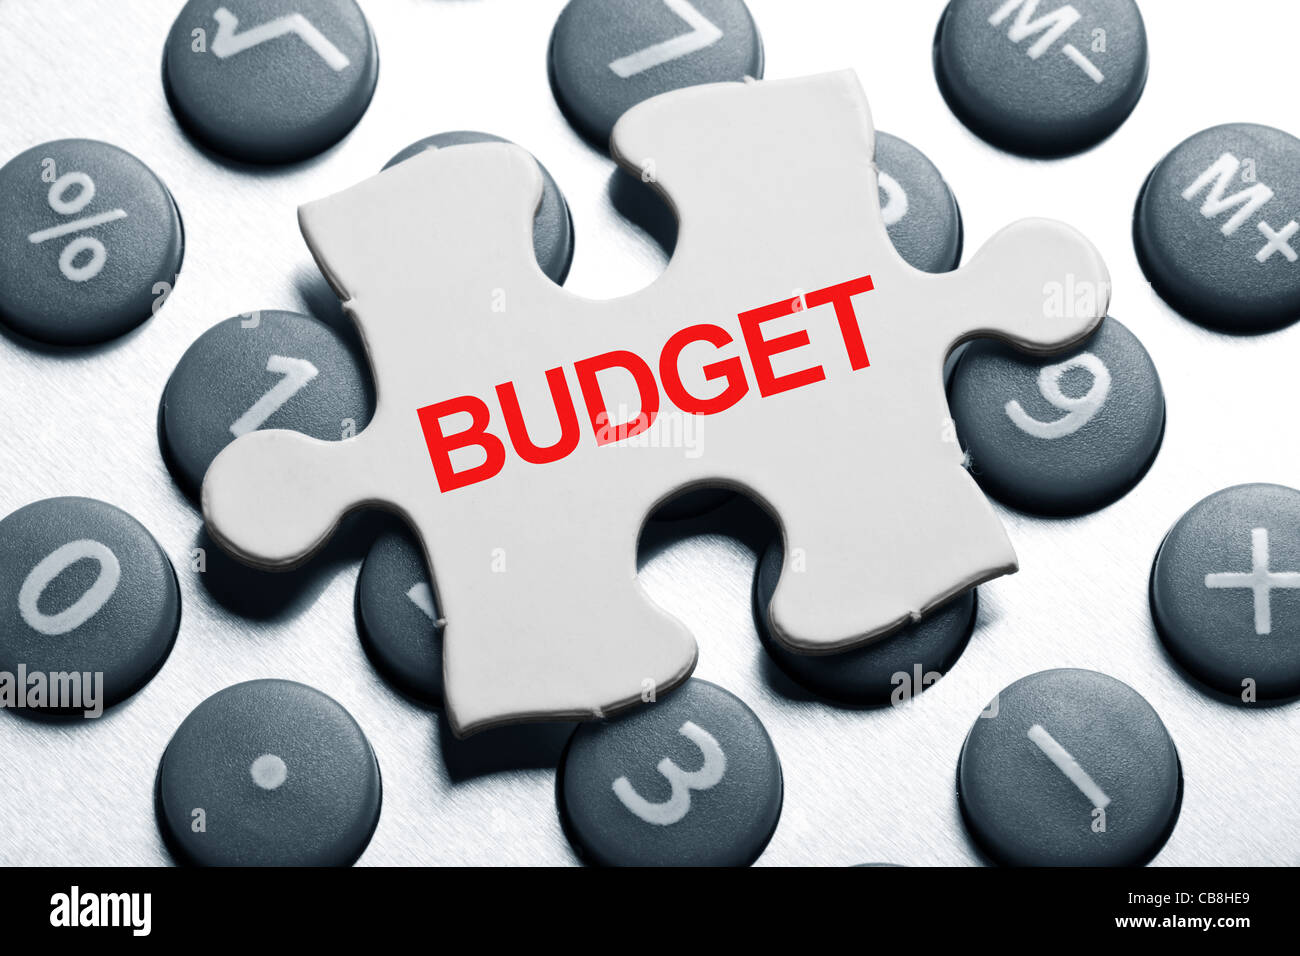 calculator and Puzzle, business concept of Budget Stock Photo